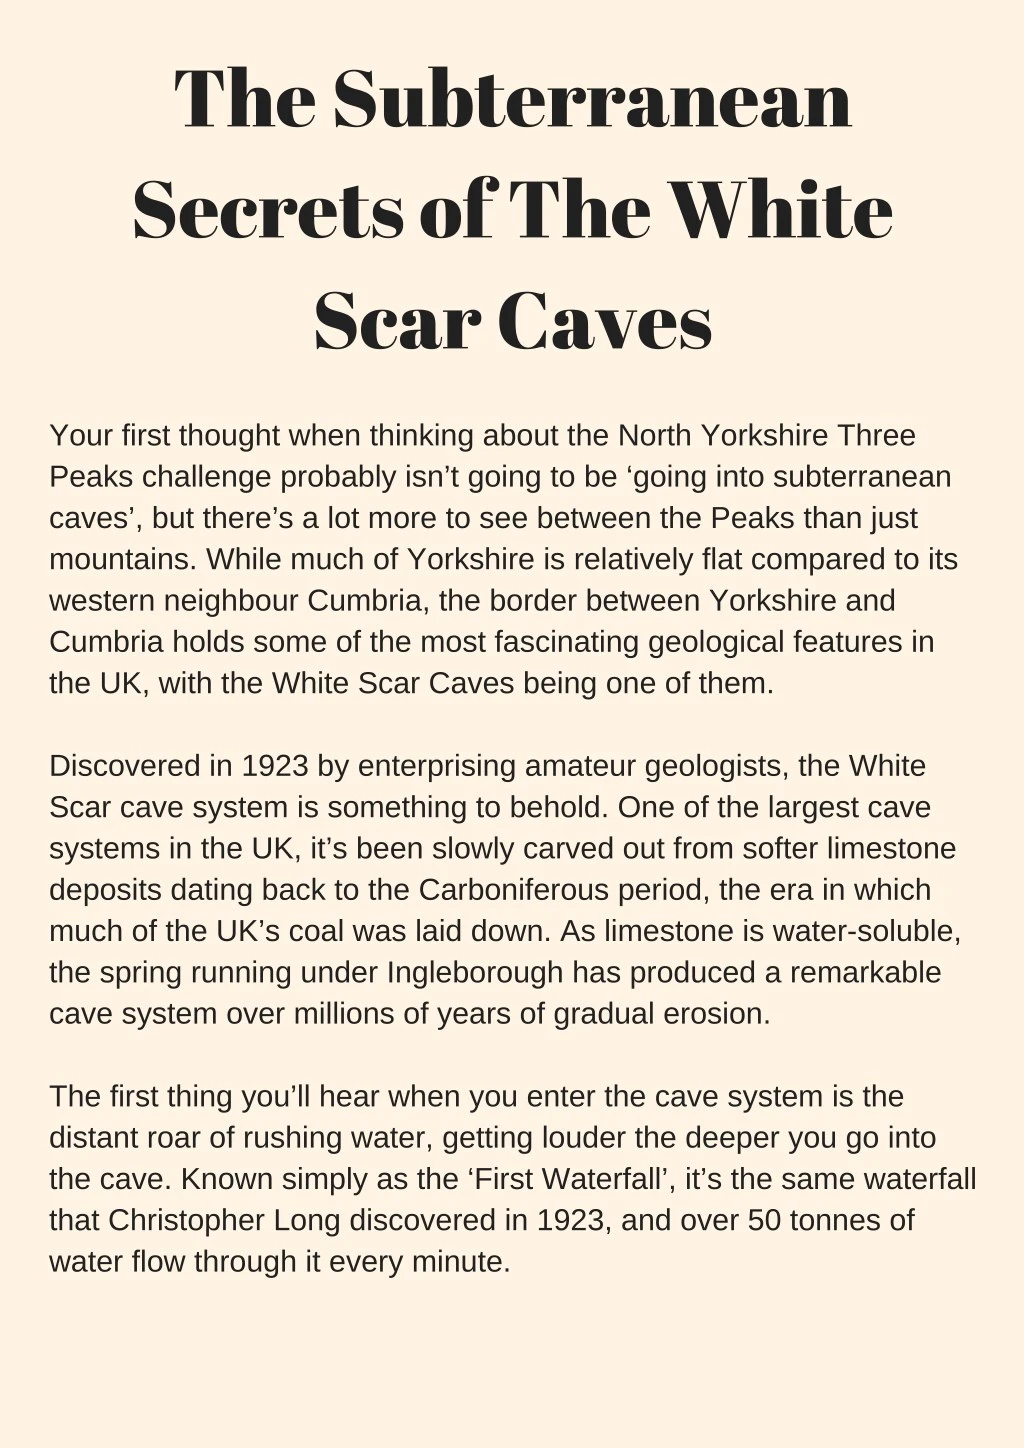 the subterranean secrets of the white scar caves